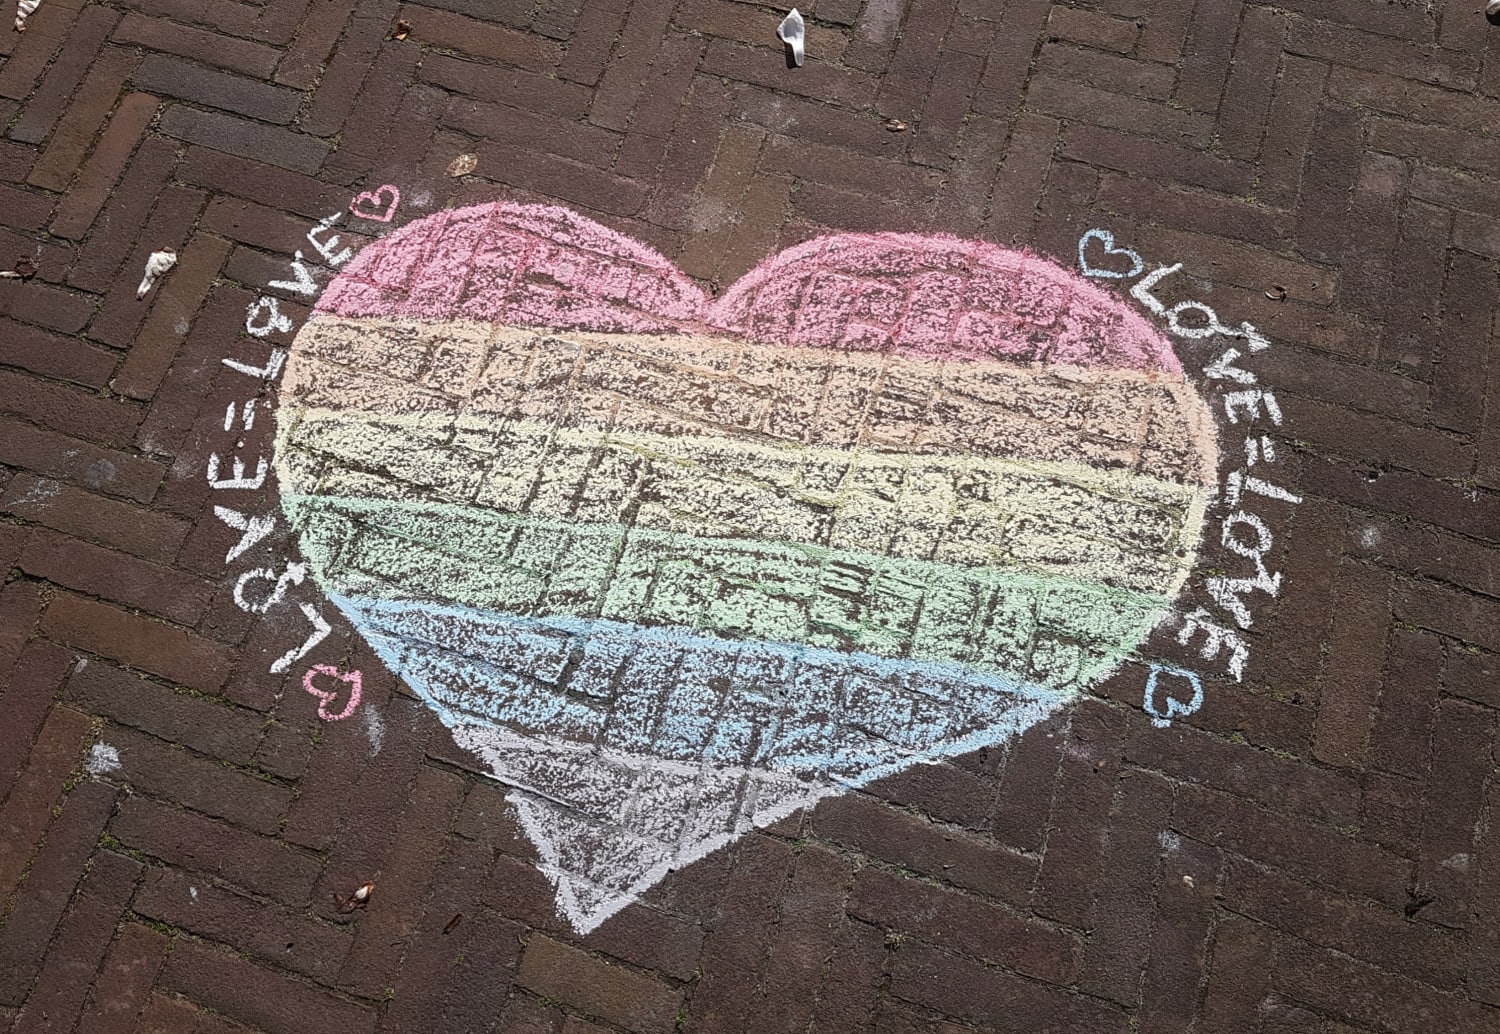 On April 1st 2001, the Netherlands was the first country to legalise same-sex marriage. (So I made this chalk drawing on the sidewalk yesterday ♡)